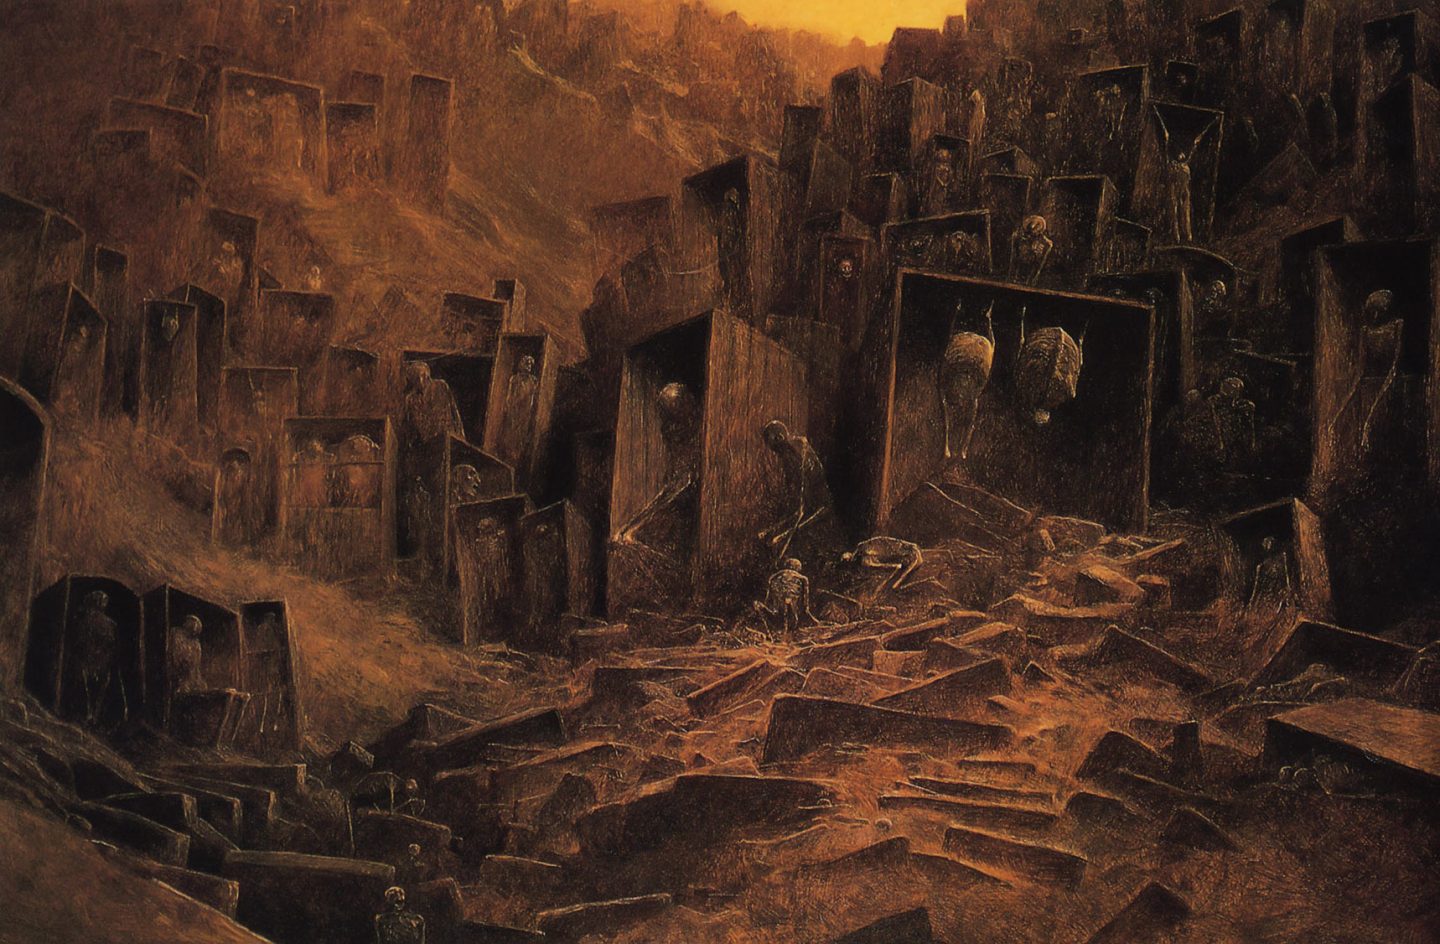 Paintings by Polish artist Zdzisław Beksiński, like the one above, were major influences on the production of the Dawn of War III trailer.